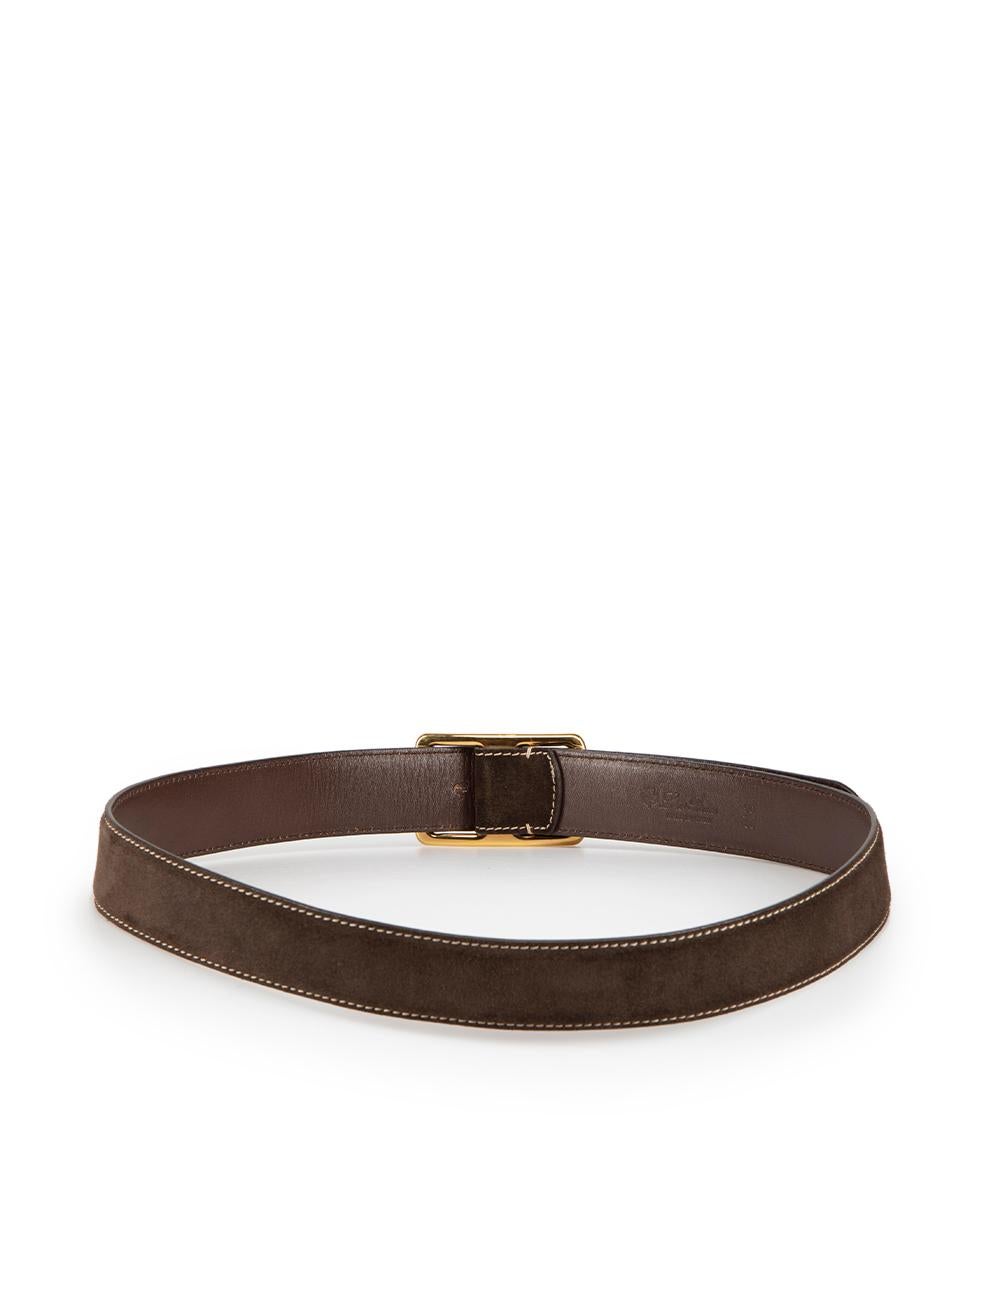 Loro Piana Brown Suede Contrast Stitch Belt In Excellent Condition In London, GB